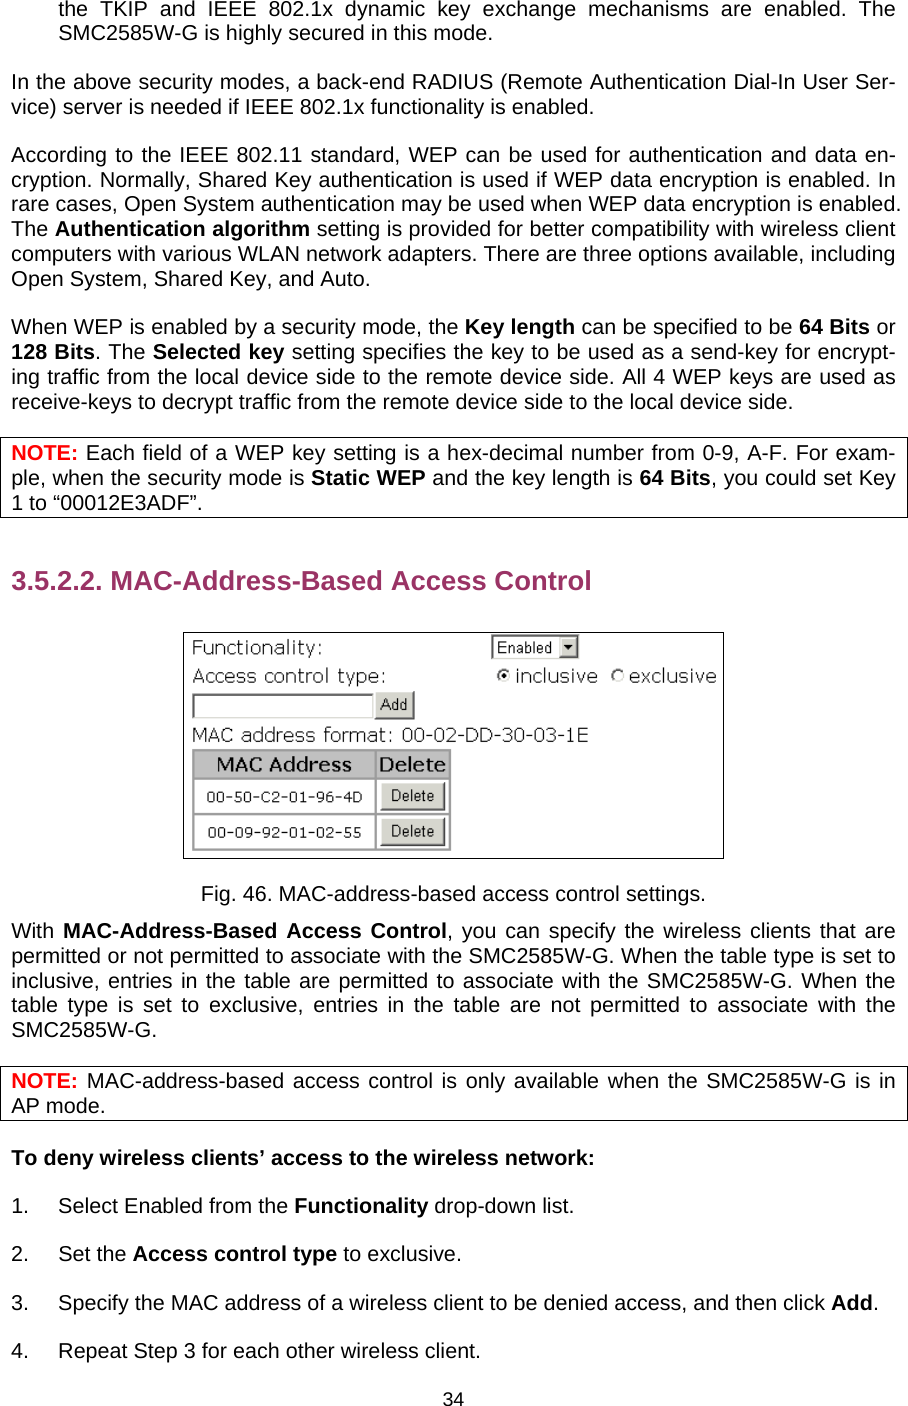   34the TKIP and IEEE 802.1x dynamic key exchange mechanisms are enabled. The SMC2585W-G is highly secured in this mode. In the above security modes, a back-end RADIUS (Remote Authentication Dial-In User Ser-vice) server is needed if IEEE 802.1x functionality is enabled.   According to the IEEE 802.11 standard, WEP can be used for authentication and data en-cryption. Normally, Shared Key authentication is used if WEP data encryption is enabled. In rare cases, Open System authentication may be used when WEP data encryption is enabled. The Authentication algorithm setting is provided for better compatibility with wireless client computers with various WLAN network adapters. There are three options available, including Open System, Shared Key, and Auto. When WEP is enabled by a security mode, the Key length can be specified to be 64 Bits or 128 Bits. The Selected key setting specifies the key to be used as a send-key for encrypt-ing traffic from the local device side to the remote device side. All 4 WEP keys are used as receive-keys to decrypt traffic from the remote device side to the local device side. NOTE: Each field of a WEP key setting is a hex-decimal number from 0-9, A-F. For exam-ple, when the security mode is Static WEP and the key length is 64 Bits, you could set Key 1 to “00012E3ADF”. 3.5.2.2. MAC-Address-Based Access Control  Fig. 46. MAC-address-based access control settings. With MAC-Address-Based Access Control, you can specify the wireless clients that are permitted or not permitted to associate with the SMC2585W-G. When the table type is set to inclusive, entries in the table are permitted to associate with the SMC2585W-G. When the table type is set to exclusive, entries in the table are not permitted to associate with the SMC2585W-G. NOTE: MAC-address-based access control is only available when the SMC2585W-G is in AP mode. To deny wireless clients’ access to the wireless network: 1.  Select Enabled from the Functionality drop-down list. 2. Set the Access control type to exclusive. 3.  Specify the MAC address of a wireless client to be denied access, and then click Add. 4.  Repeat Step 3 for each other wireless client. 